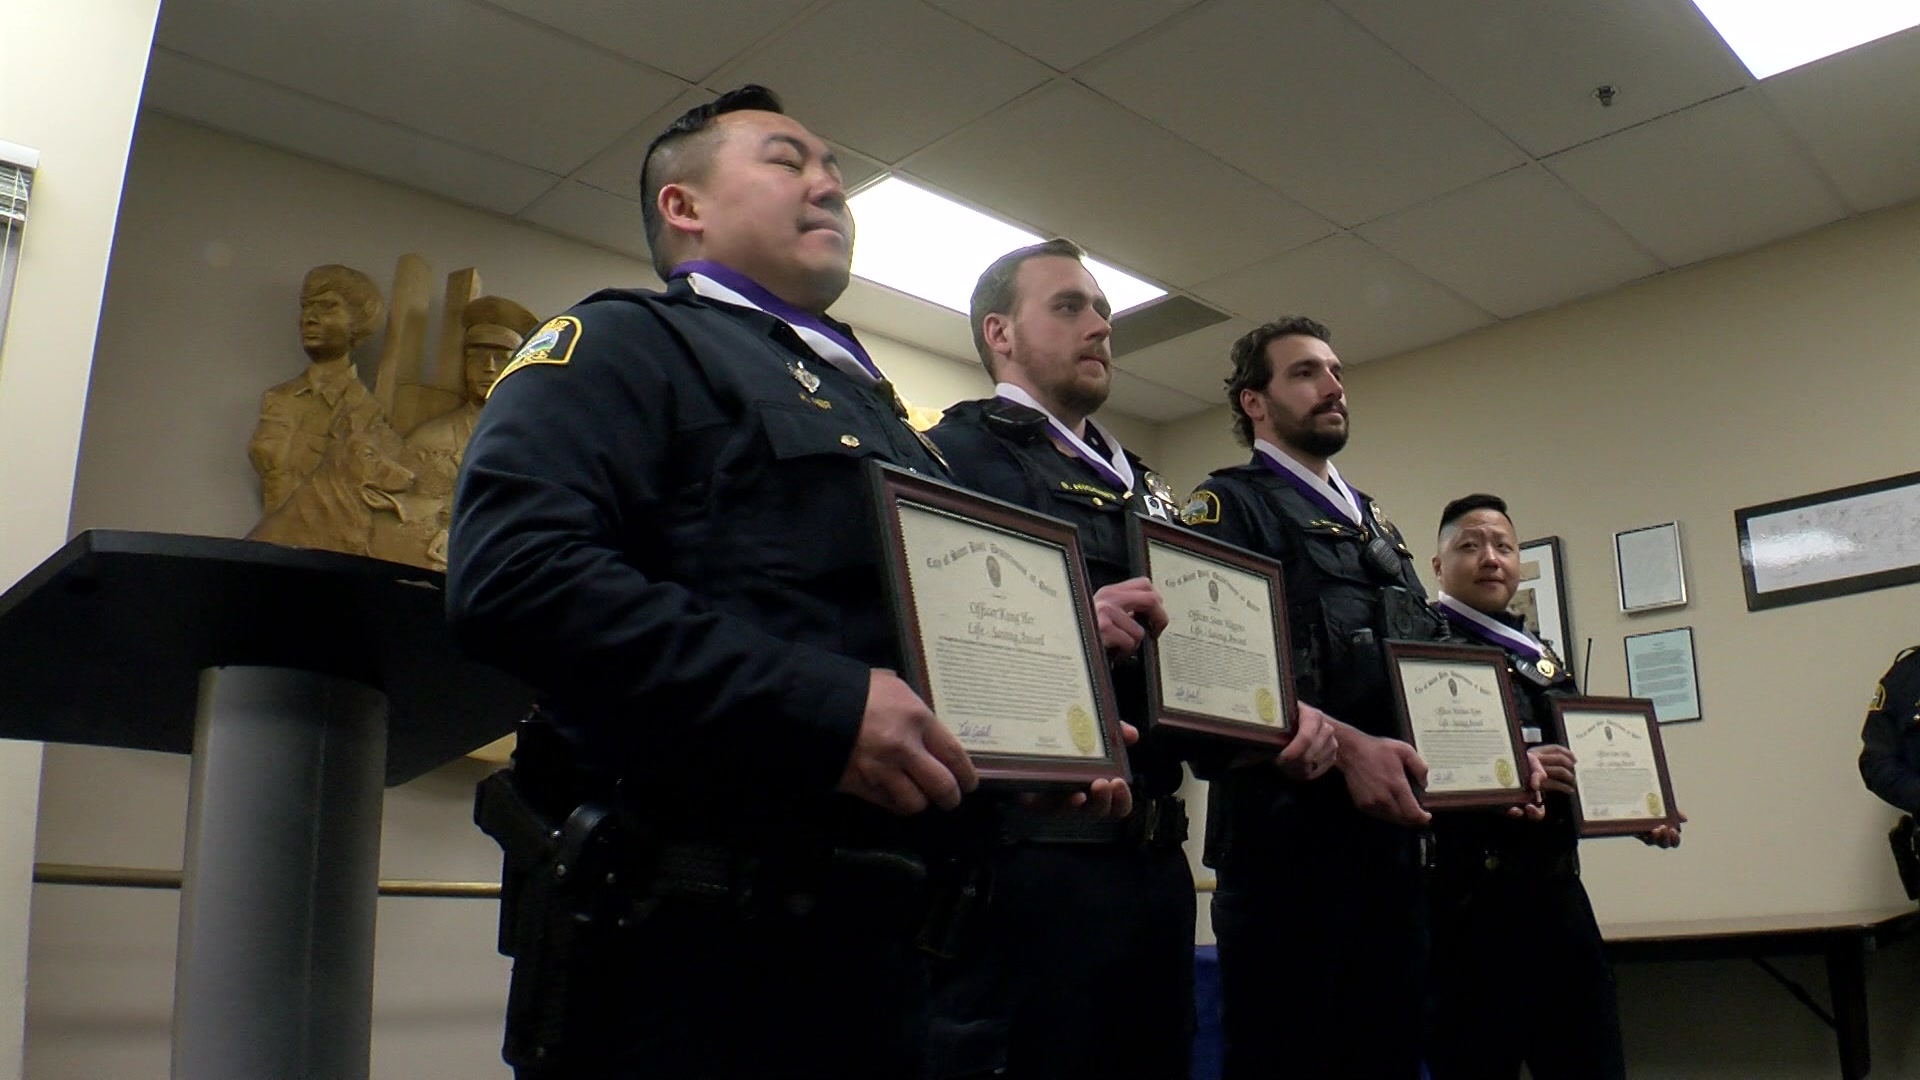 4 St. Paul Officers Honored For Saving Shooting Victim’s Life